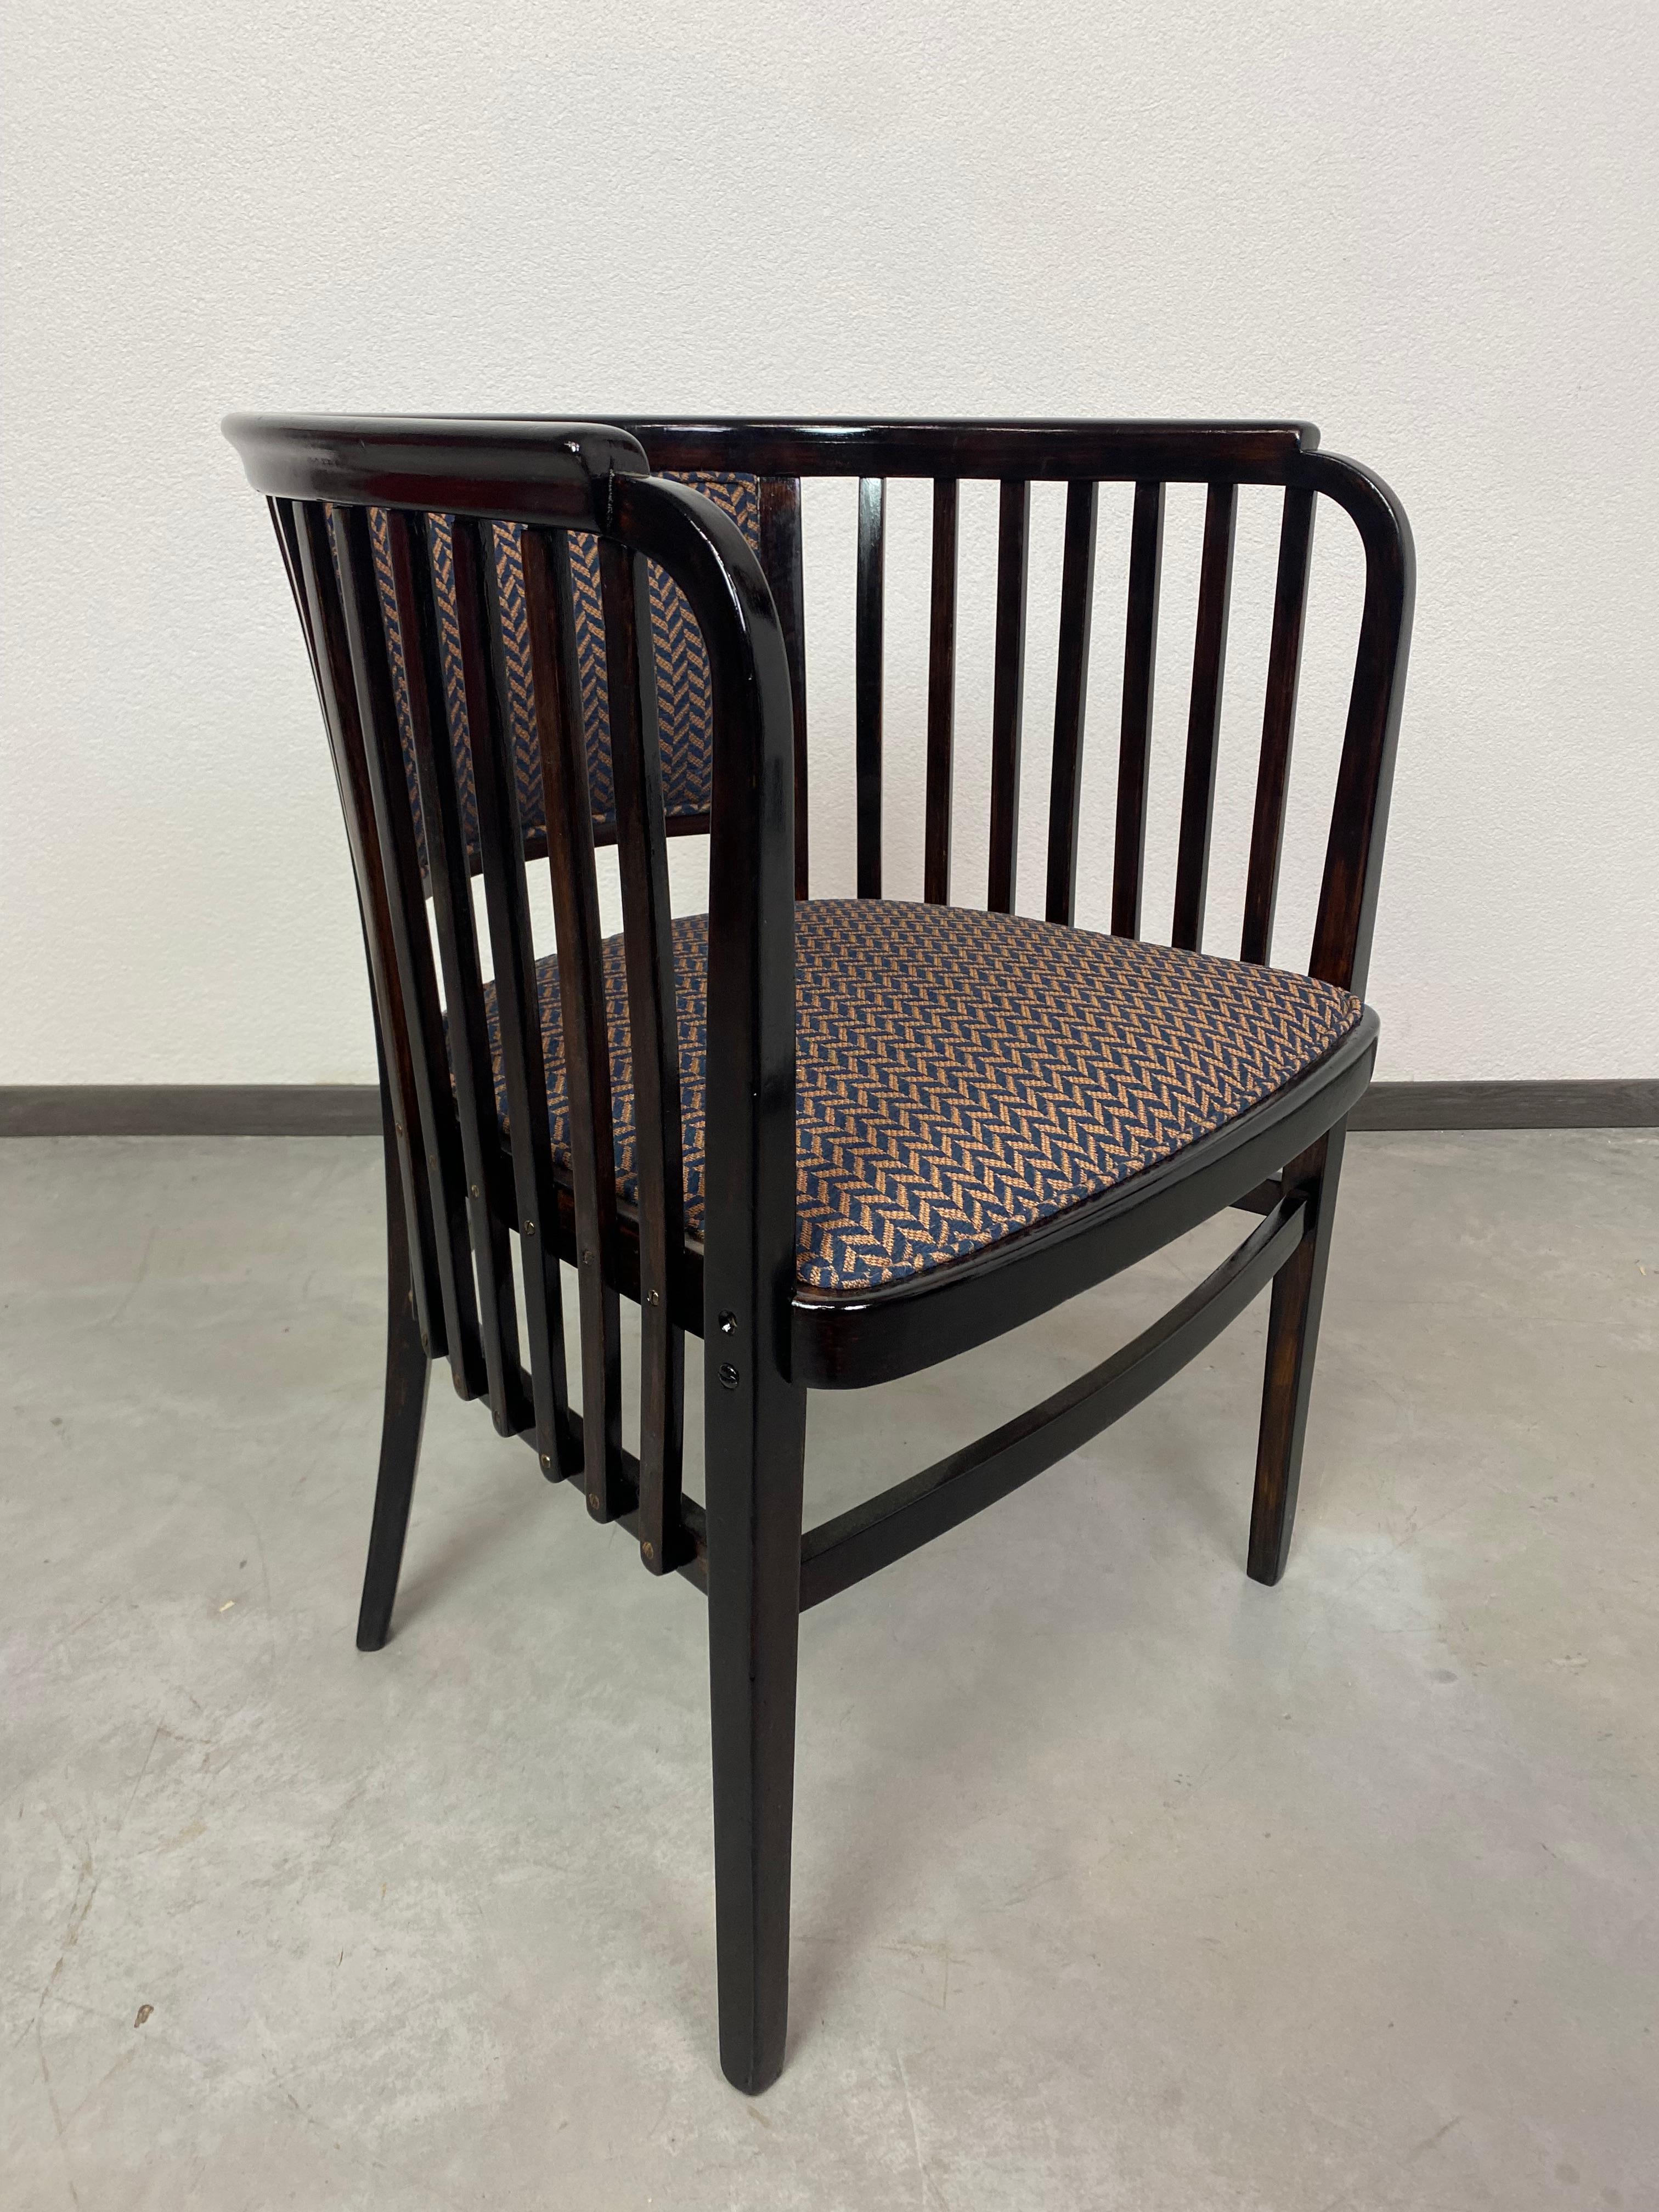 Secession office chair no.6528 by Marcel Kammerer for Thonet professionally stained and repolished.